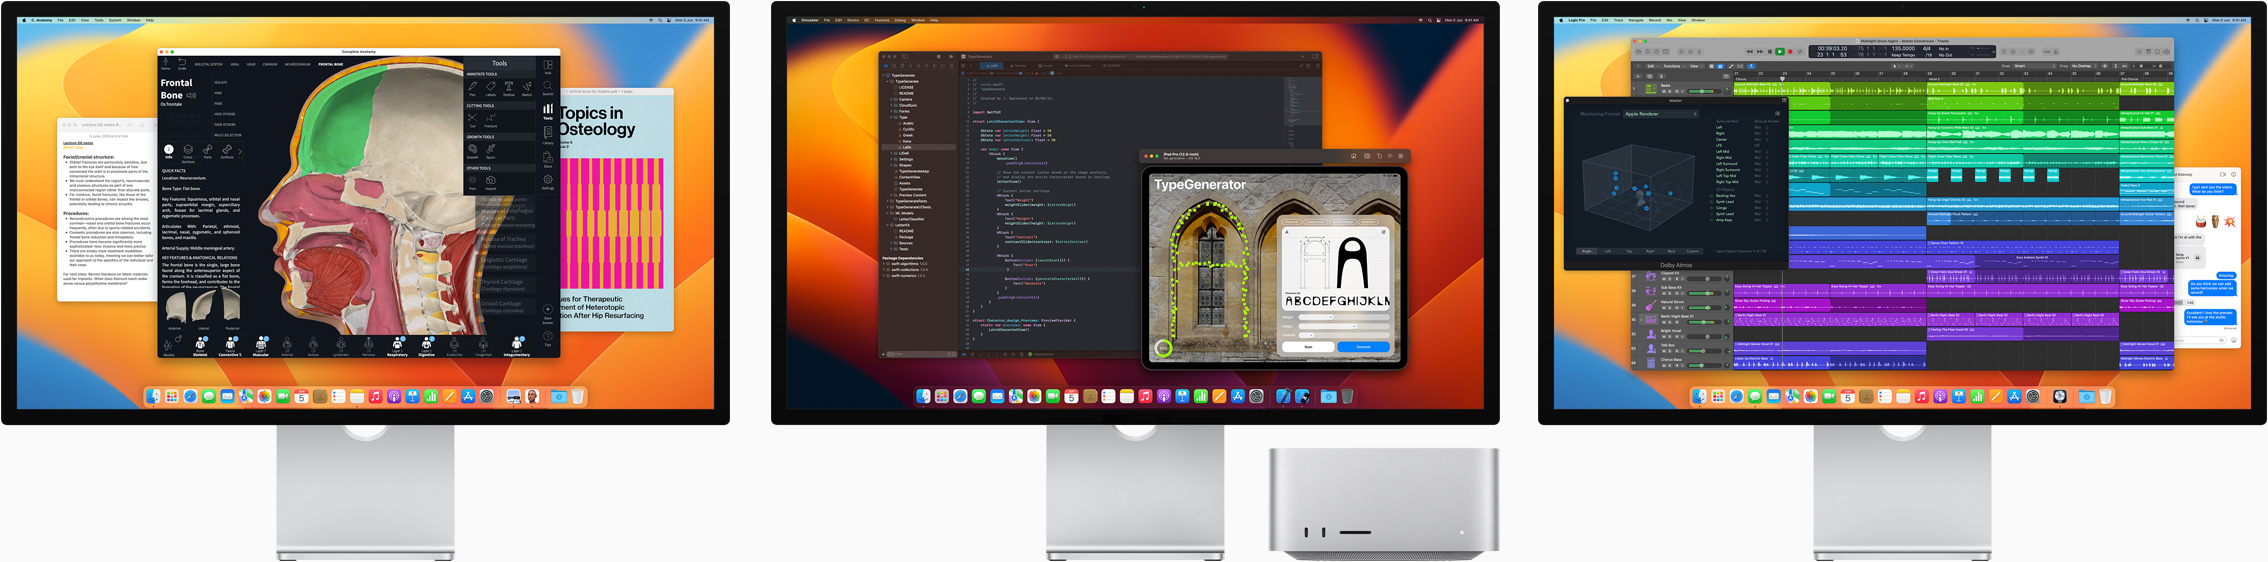 Mac Studio and three Studio Displays, all featuring different apps on screen